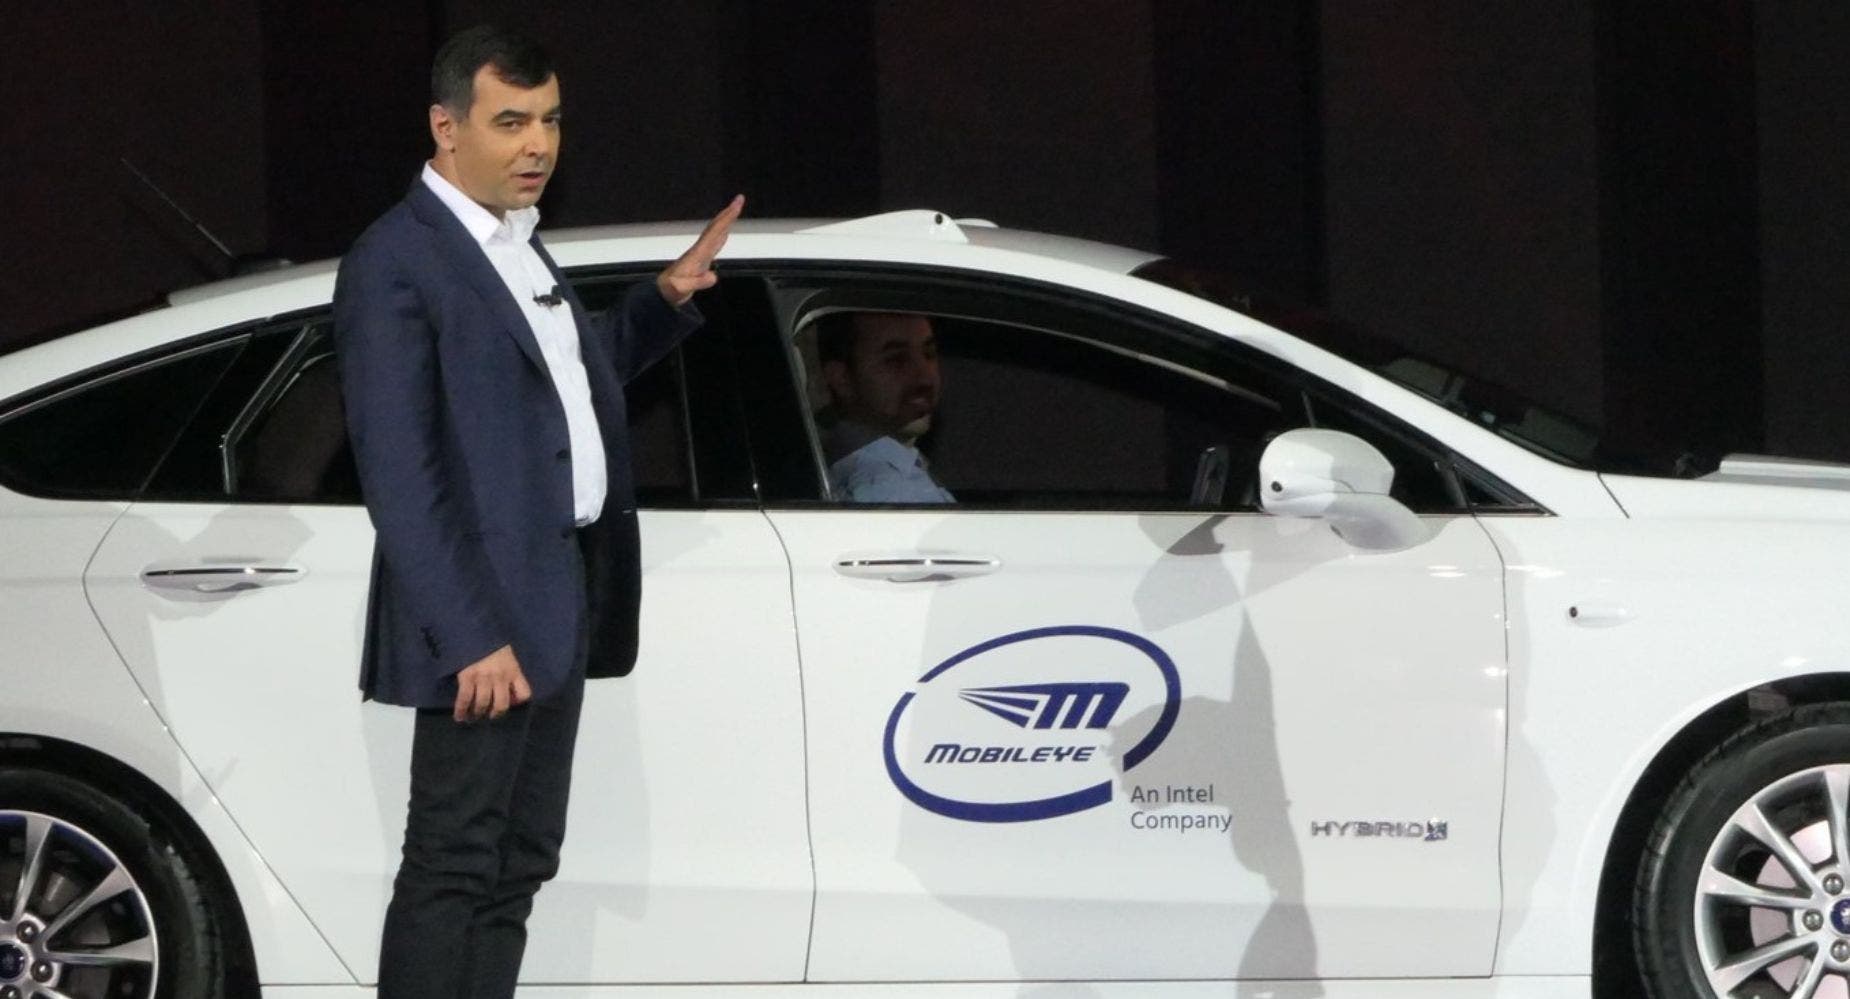 Intel Unit Mobileye's Proposed IPO: What You Need To Know